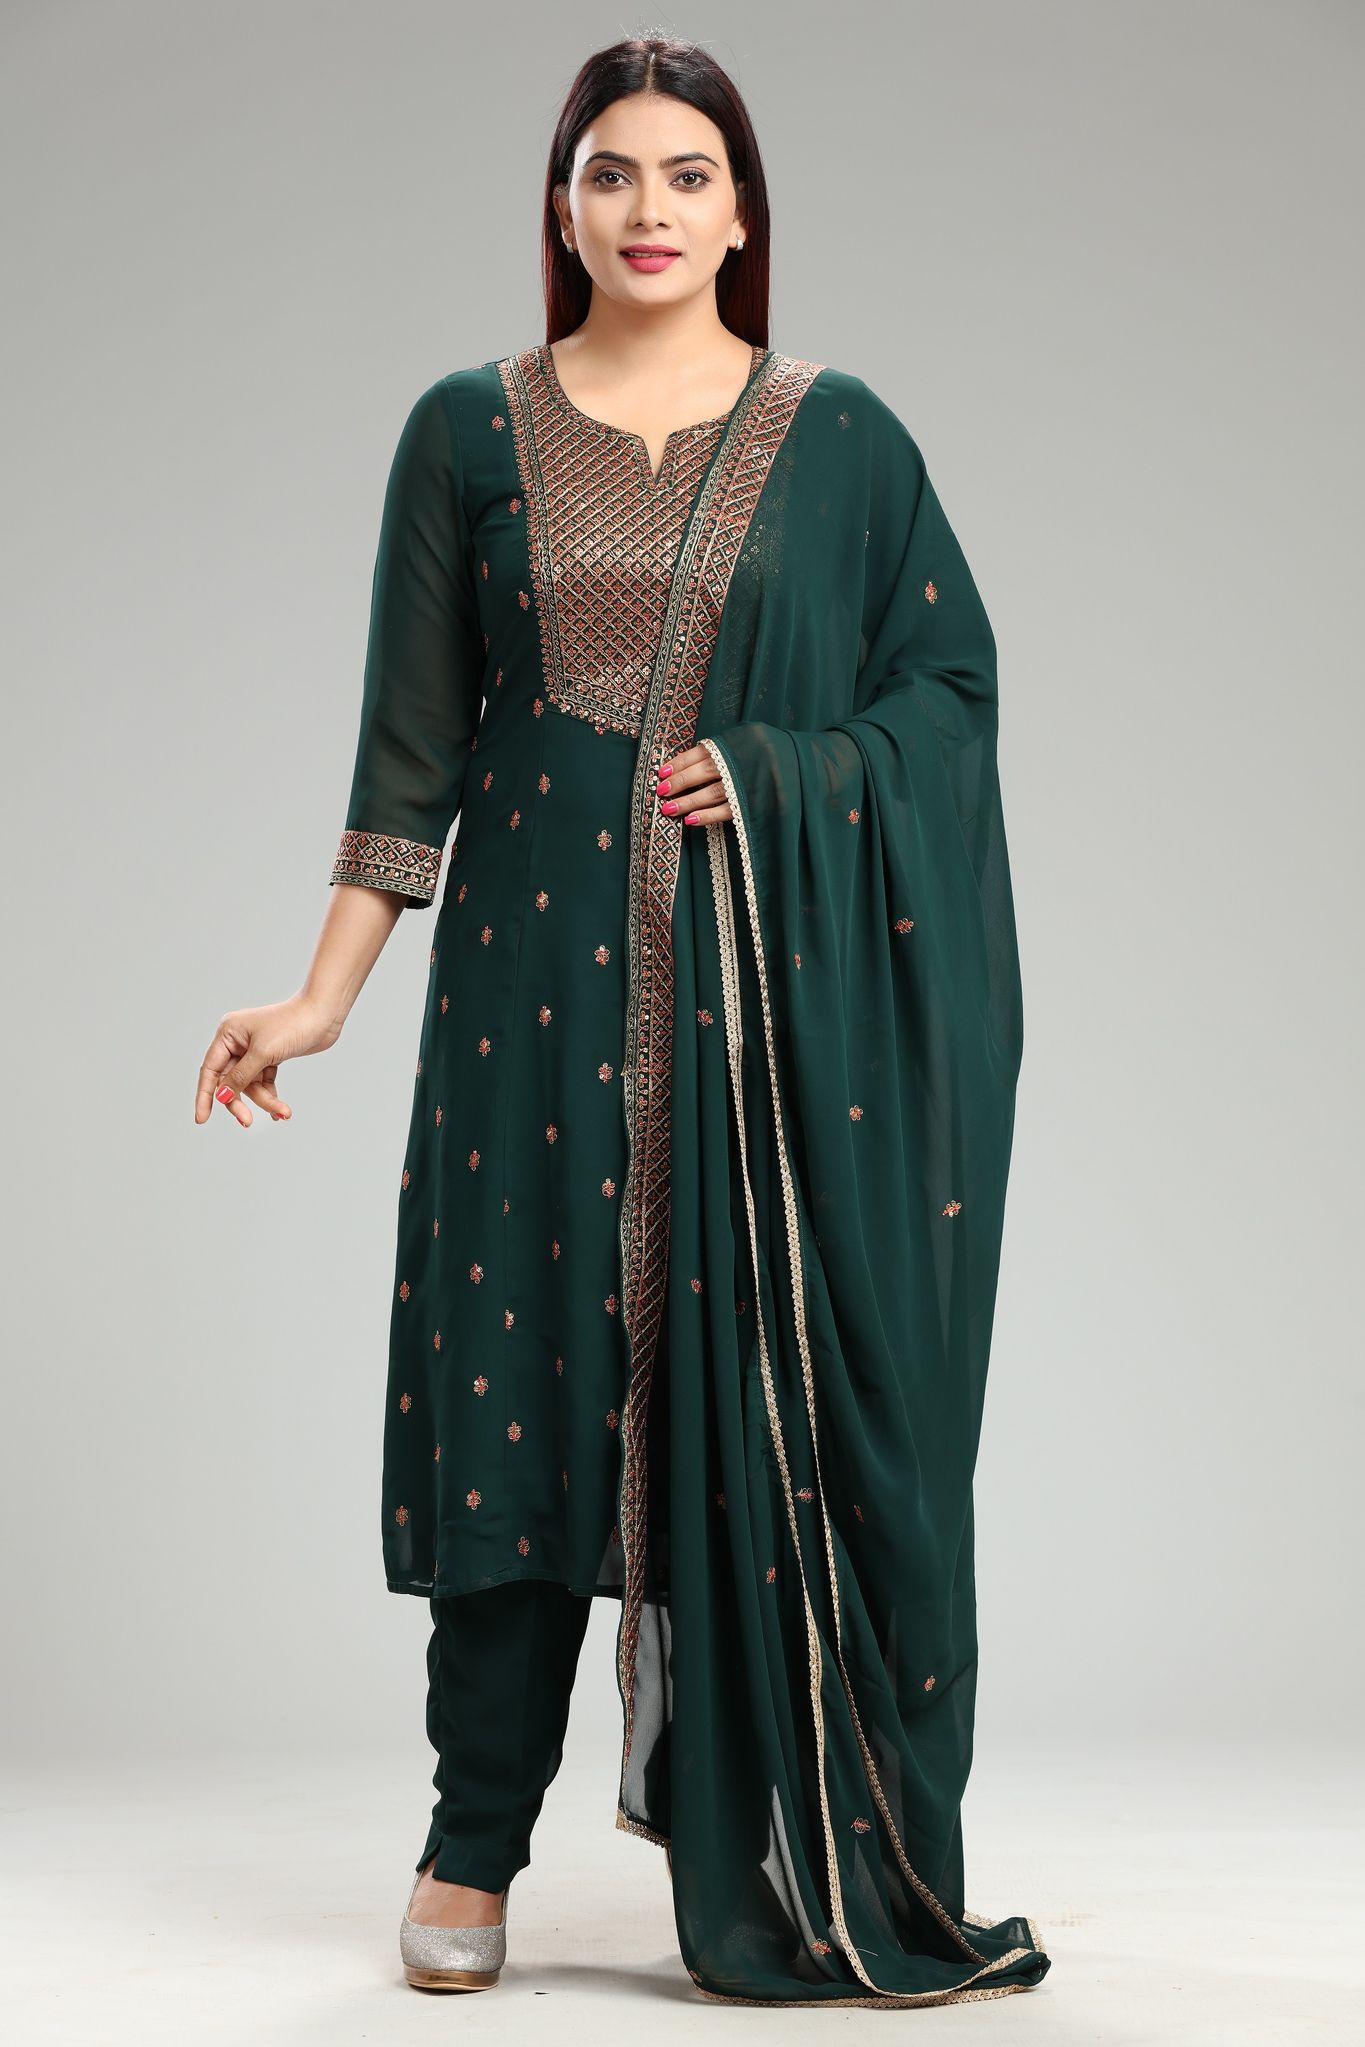 Fenna Green Georgette Embroidered Suit Set